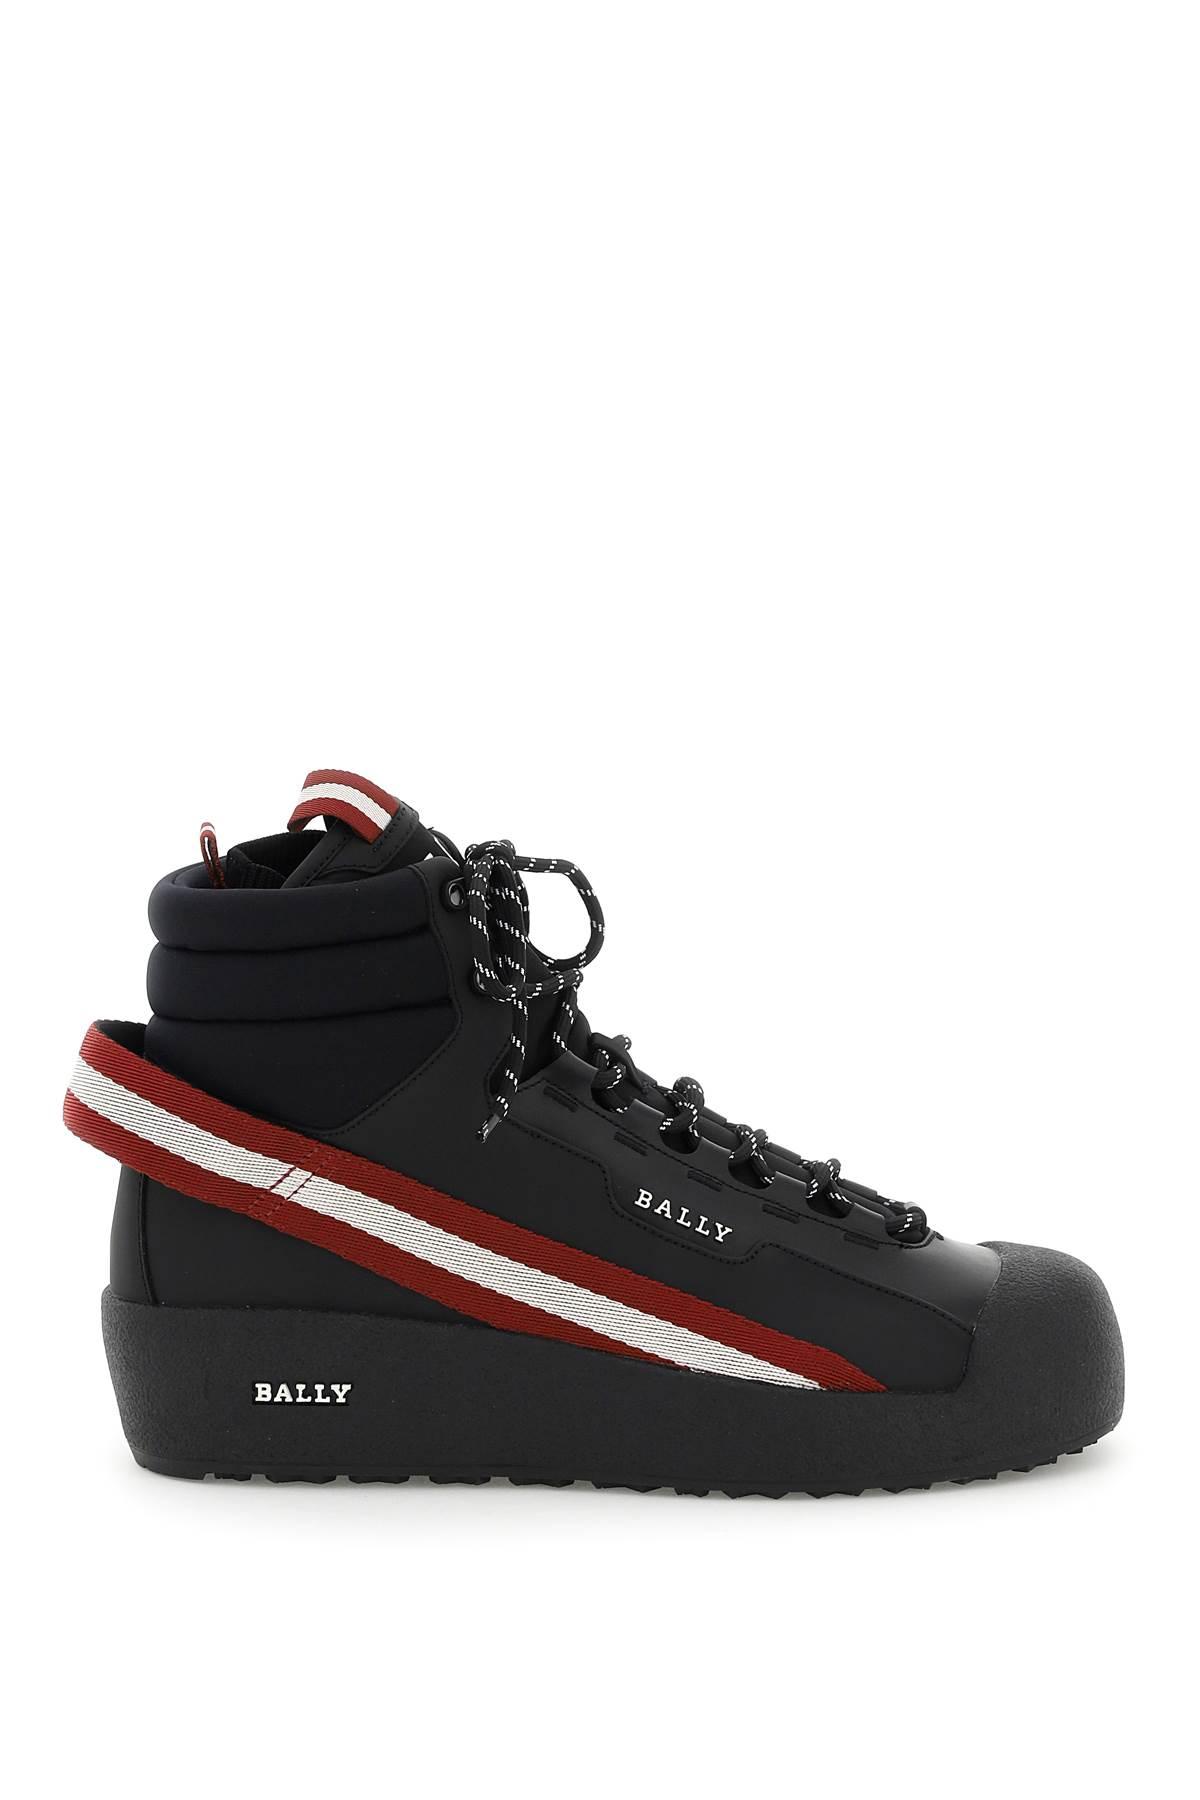 Bally 'clyde' Rubber And Leather Ankle Boots in Black for Men | Lyst